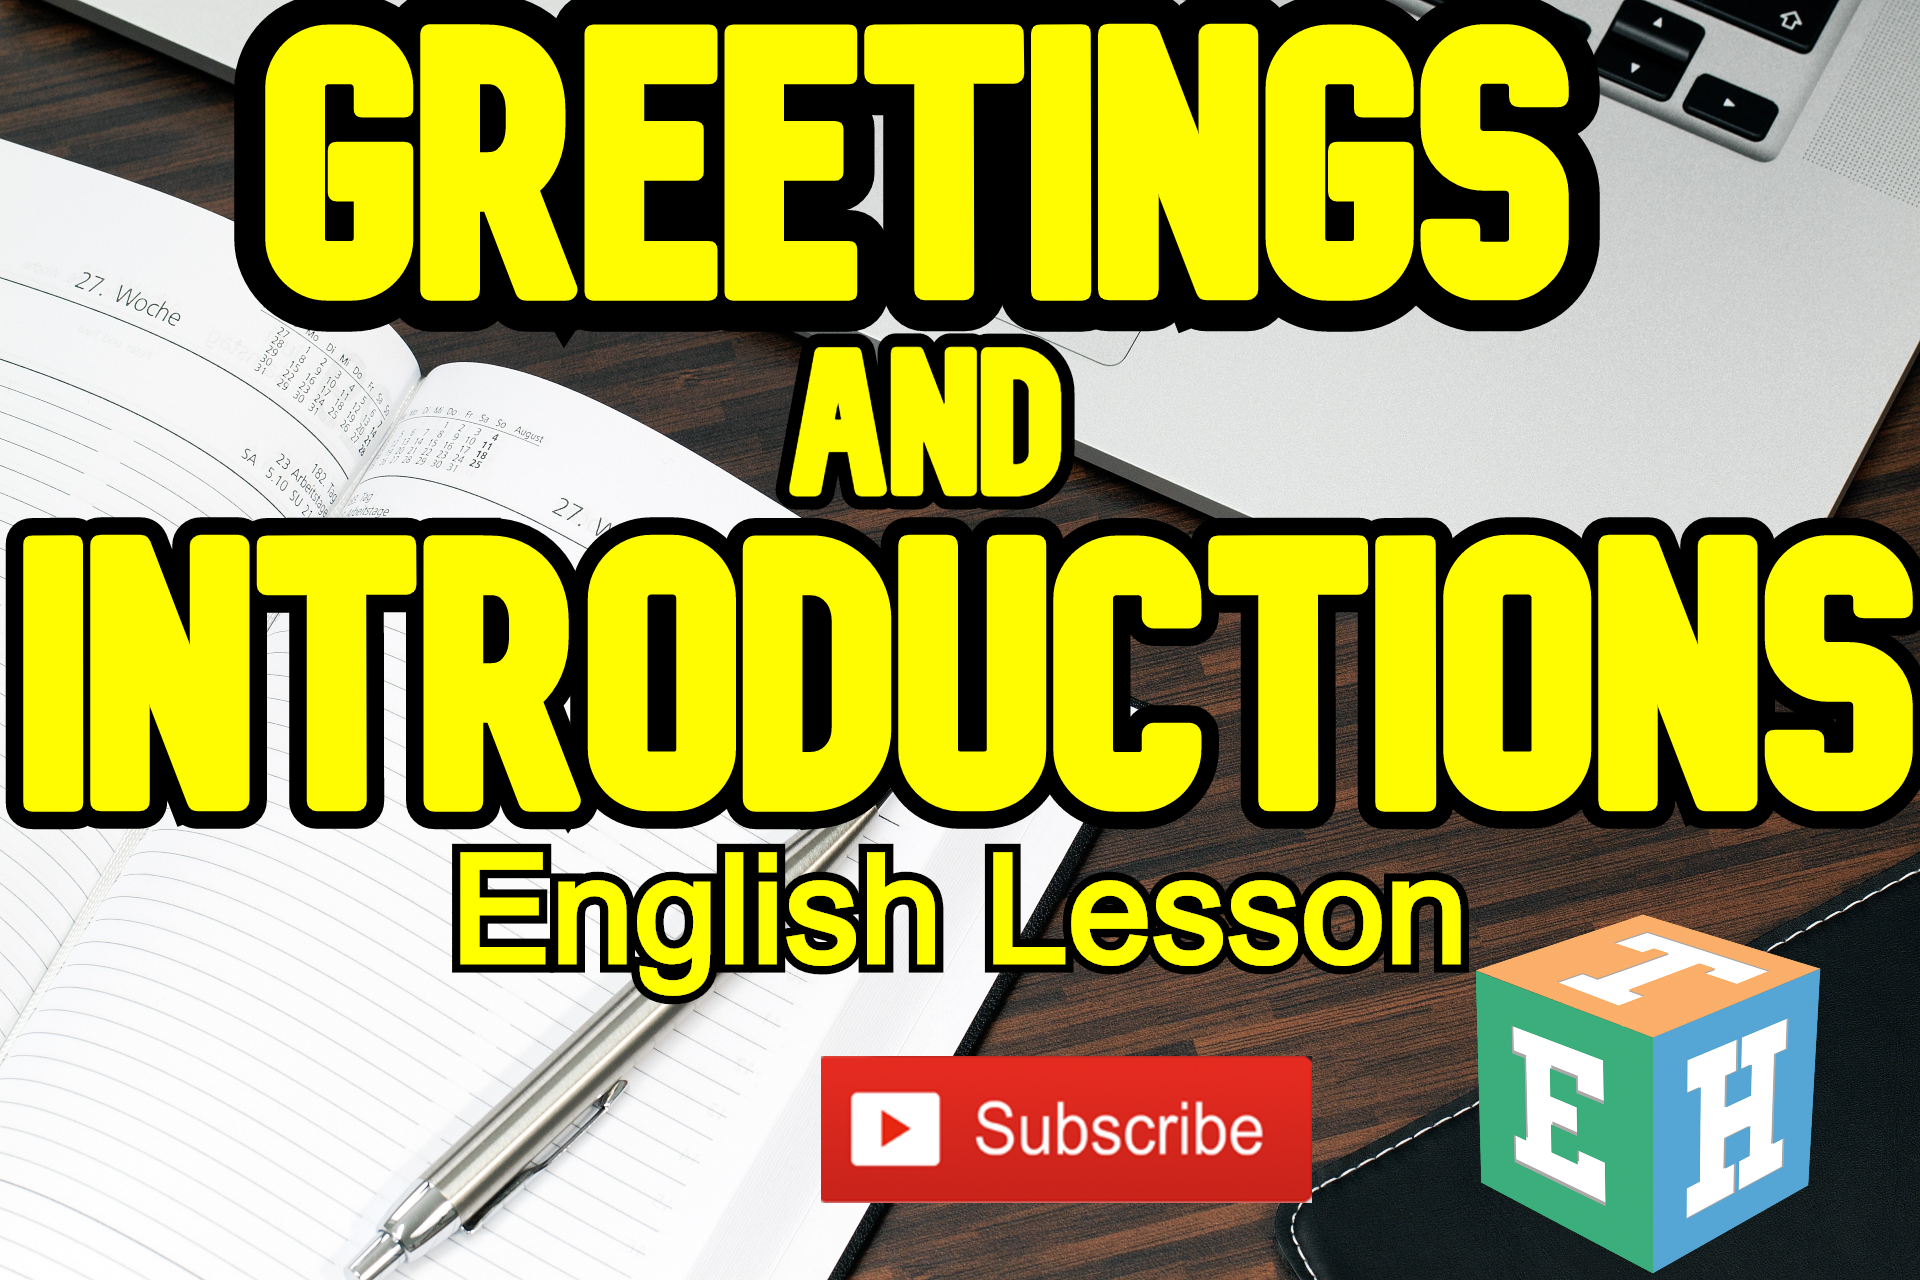 Greetings and Introductions lesson plan